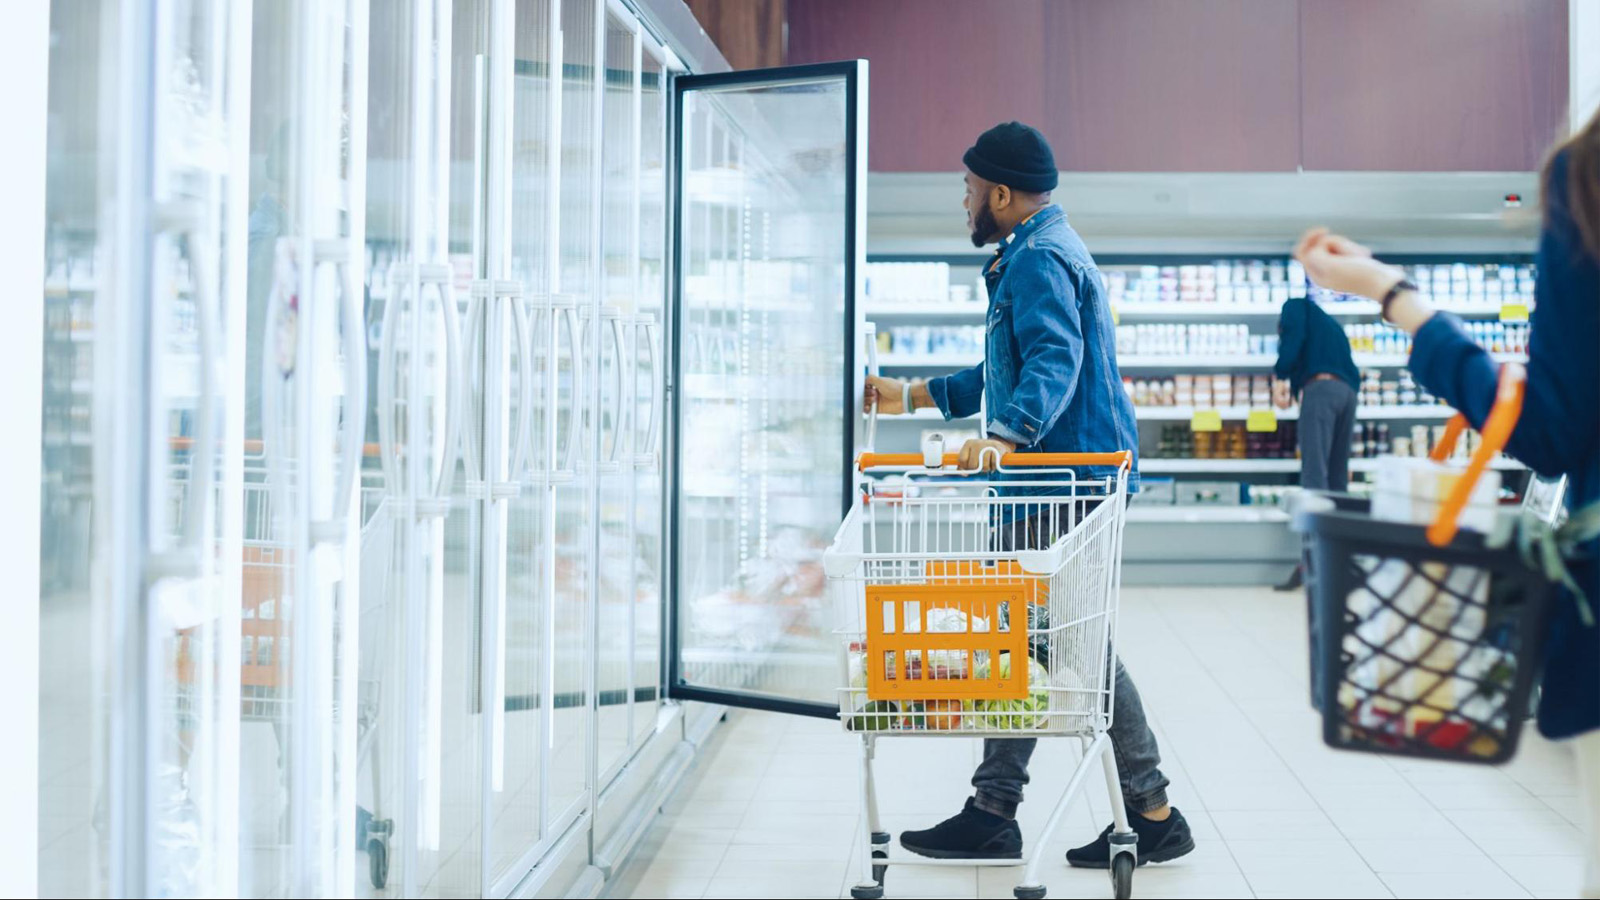 Man standing with a shopping cart opening a refrigerator door in a grocery store